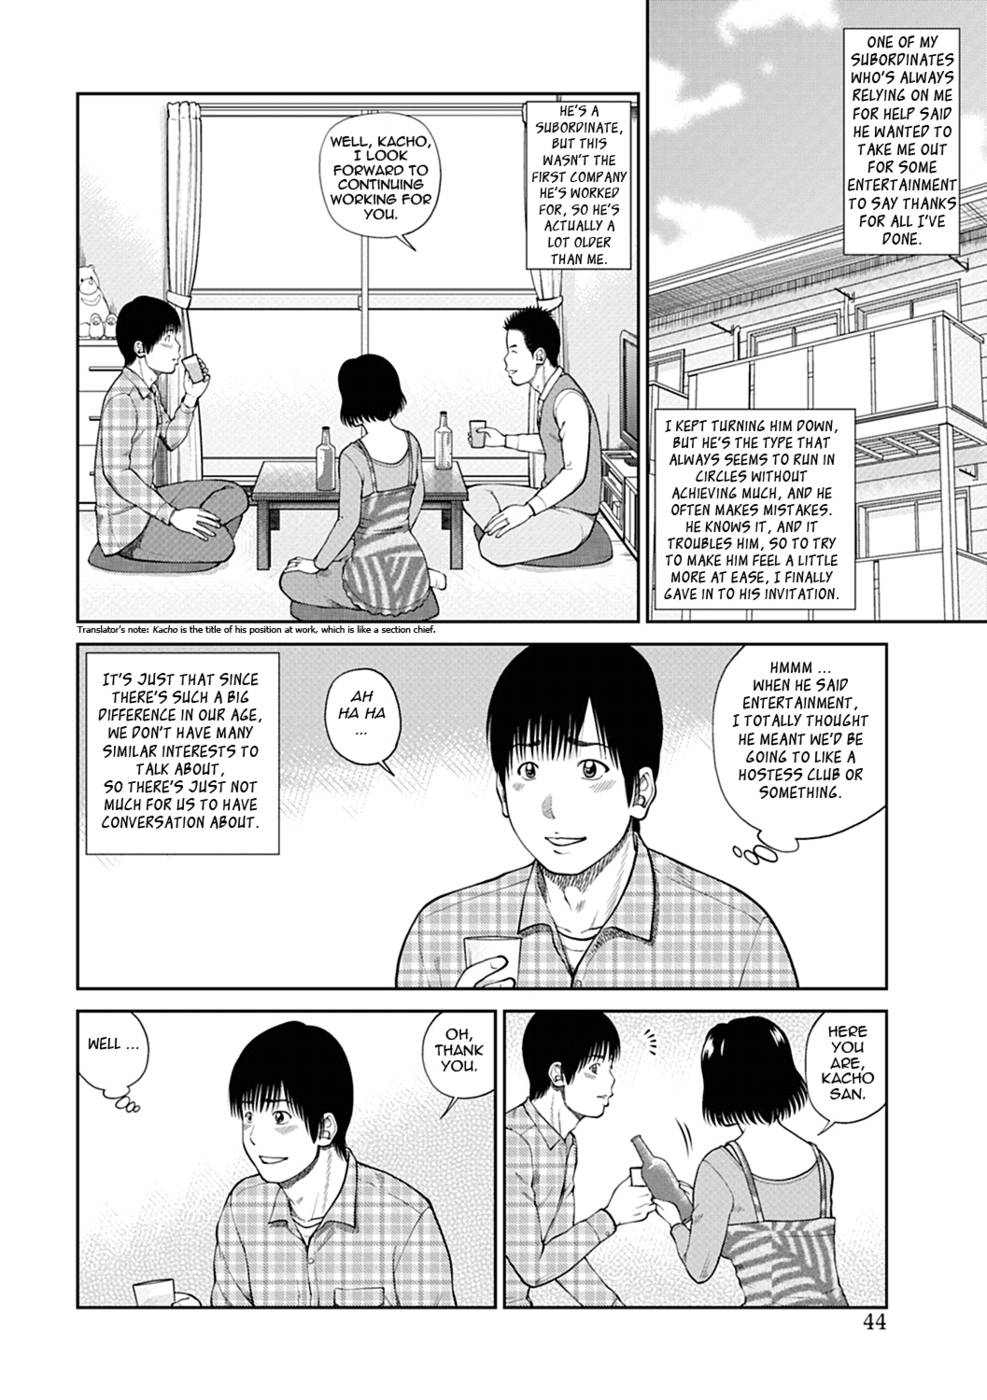 Hentai Manga Comic-34 Year Old Unsatisfied Wife-Chapter 3-Entertaining Wife-First Half-2